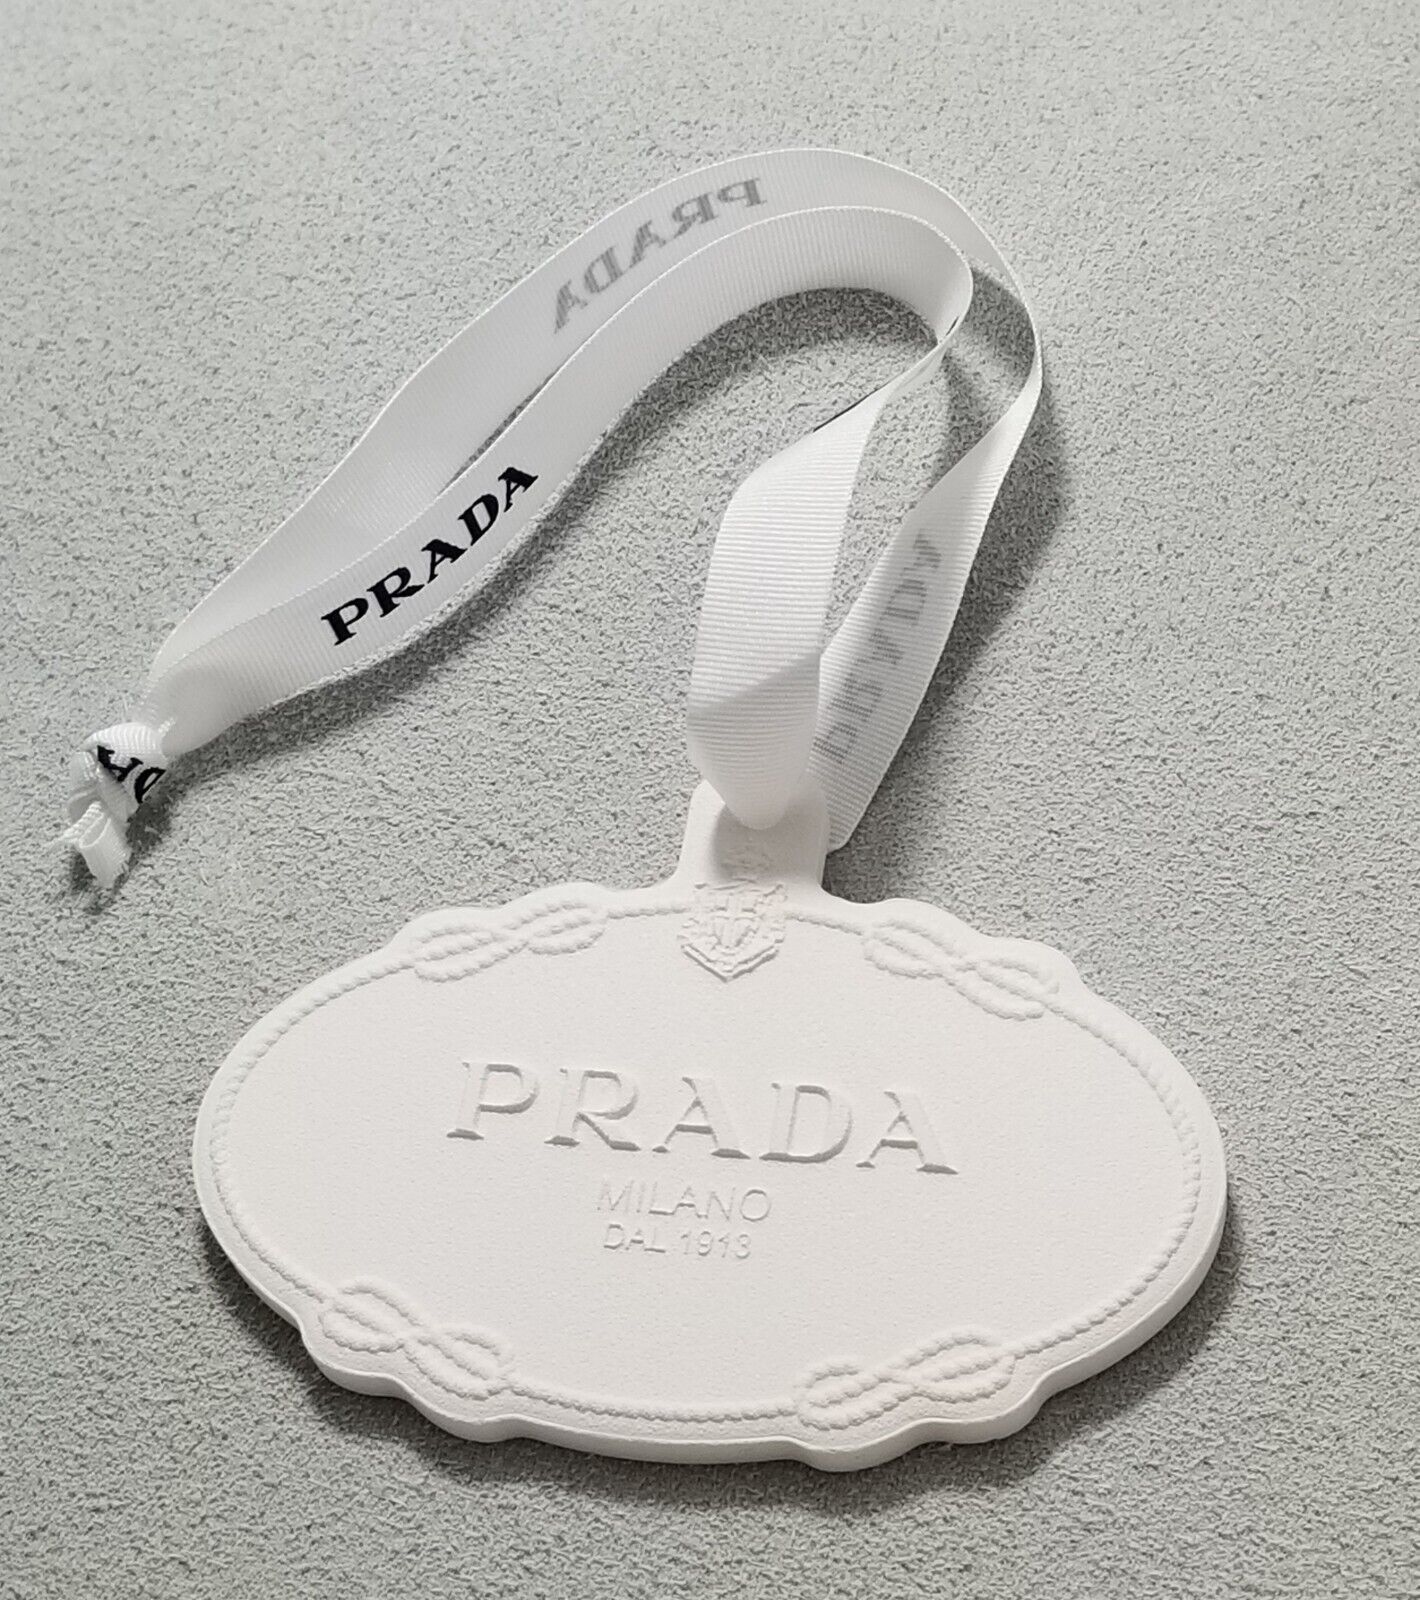 PRADA Milano PARFUMS Fragrance Stone / Unscented /NEW  / 100% AUTHENTIC 